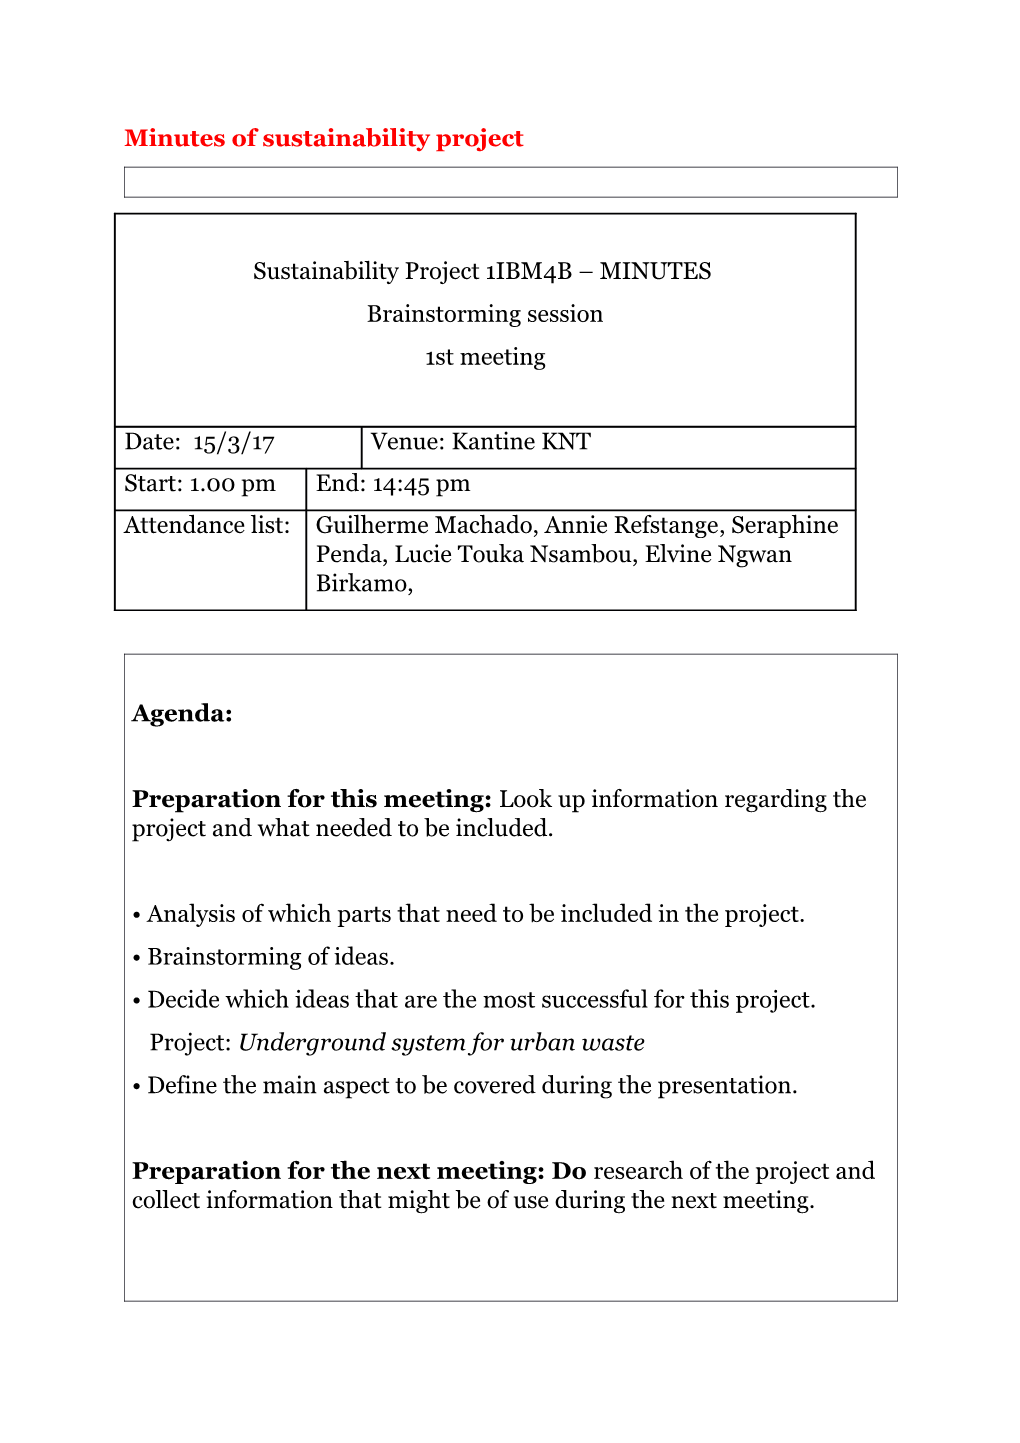 Minutes of Sustainability Project